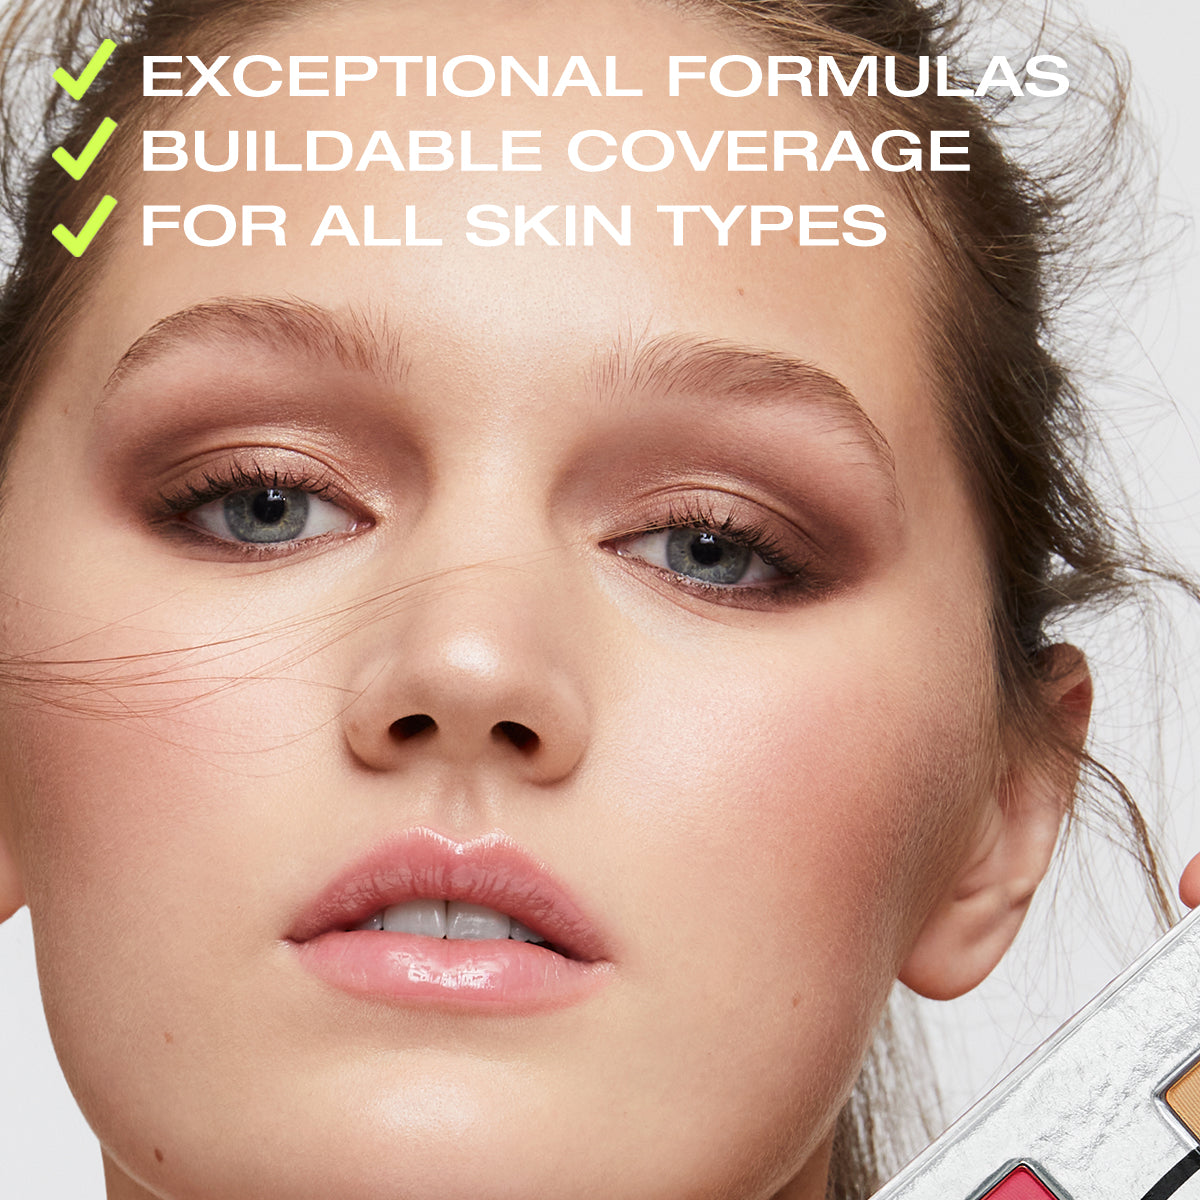 Exceptional formulas, buildable coverage, for all skin types. Close up of model with makeup applied.